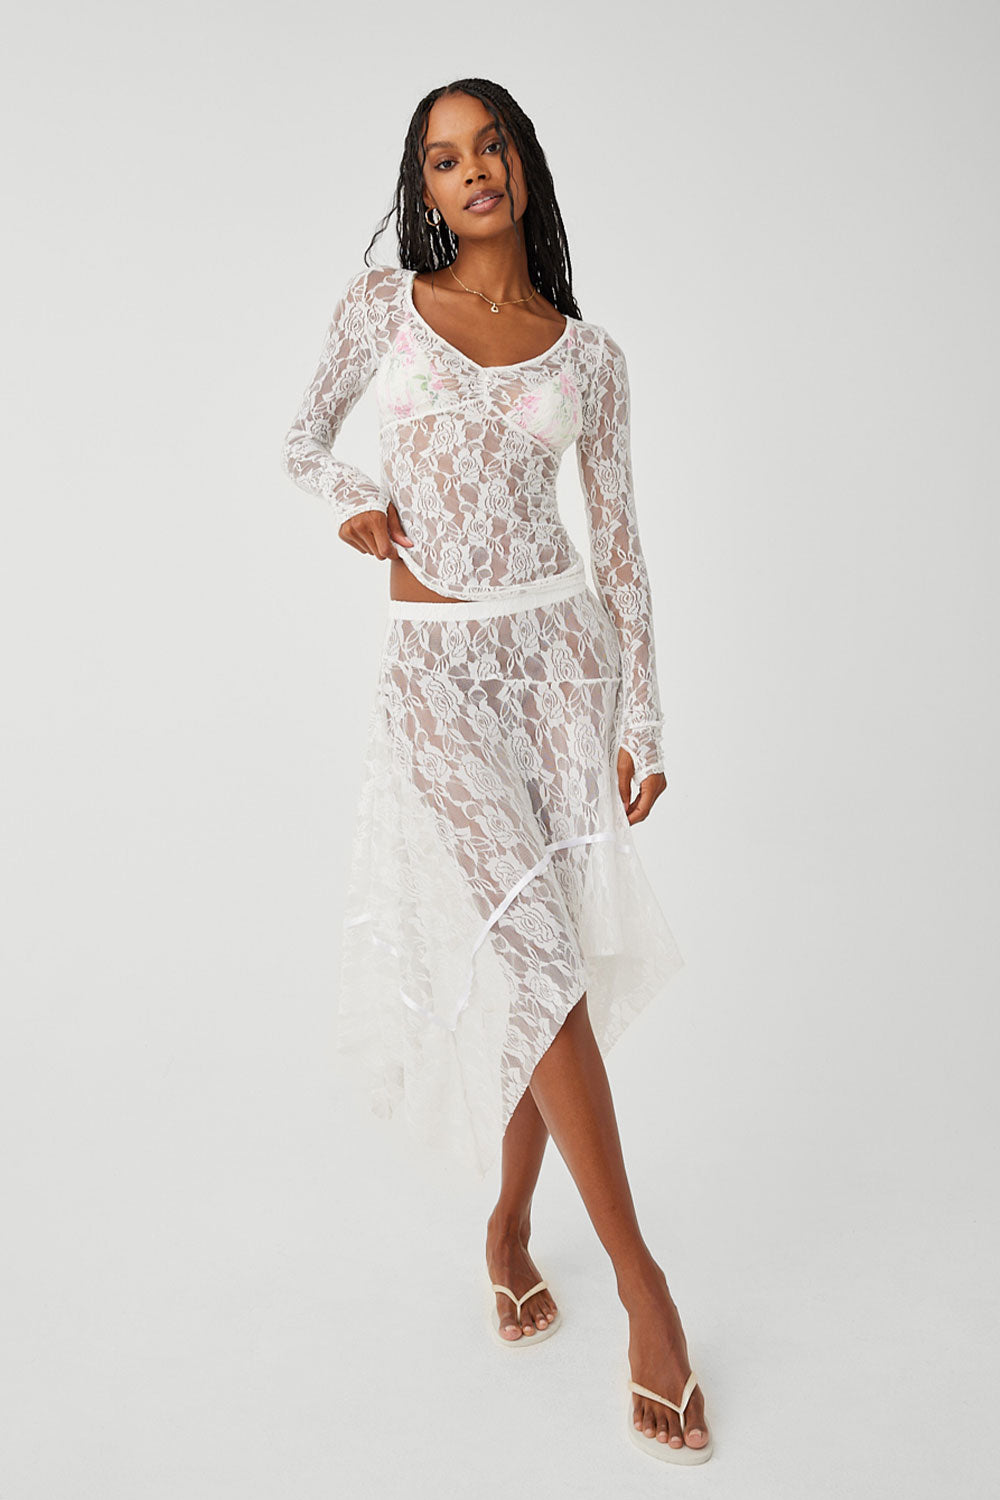 Lace in Ribbons, Trim & Embellishments